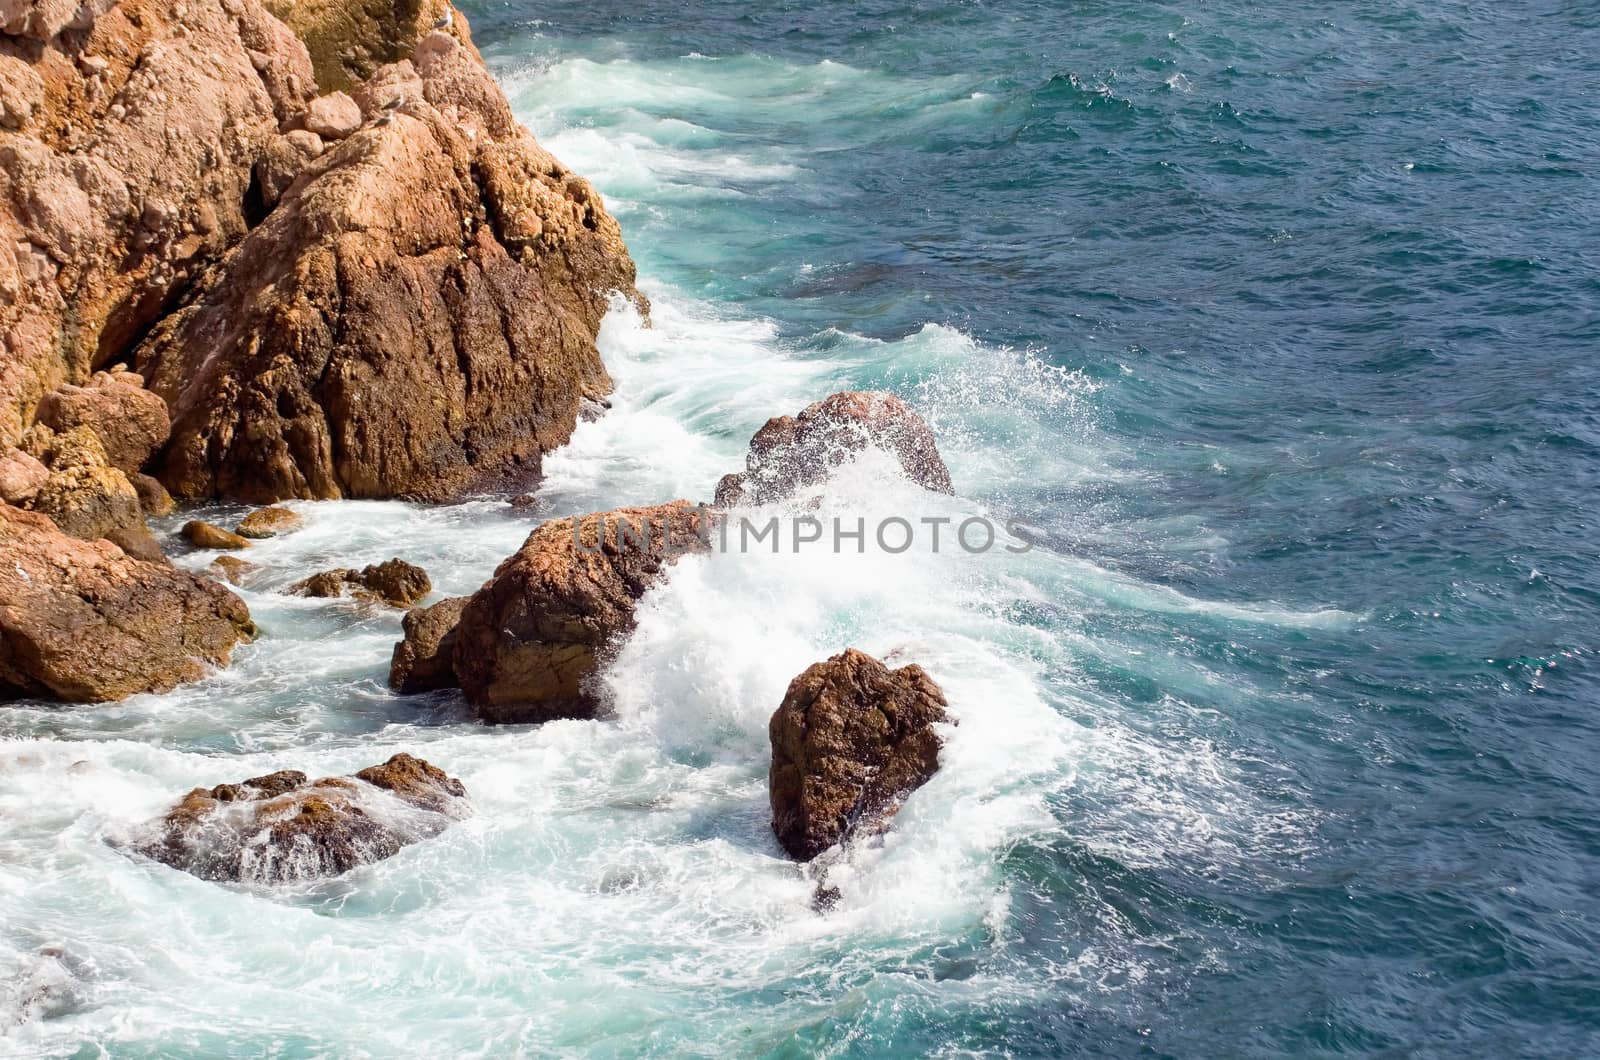 Sea waves lapping on the rocks